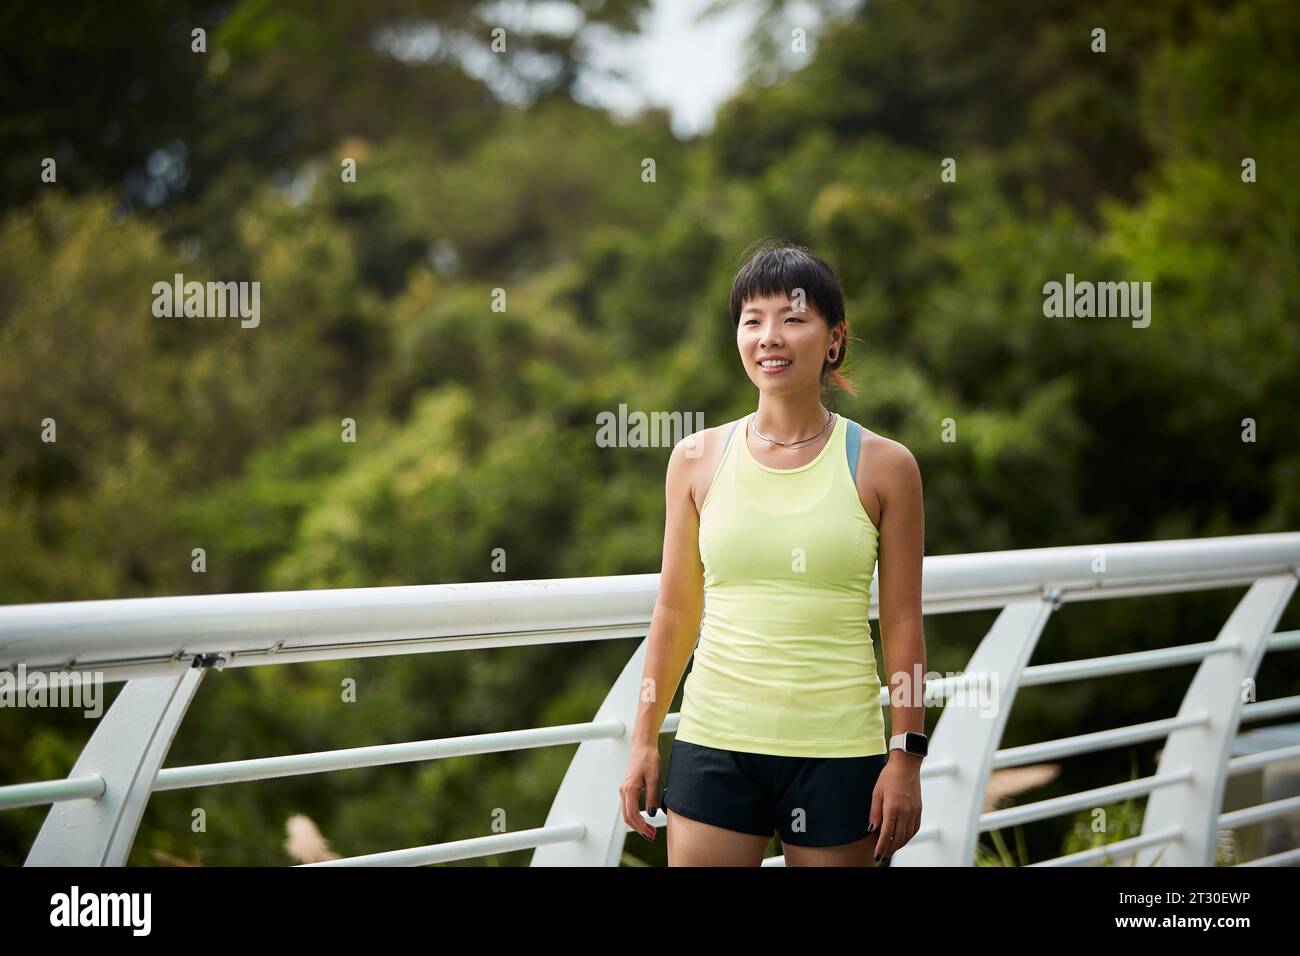 outdoor portrait of a happy young asian woman female athlete Stock Photo